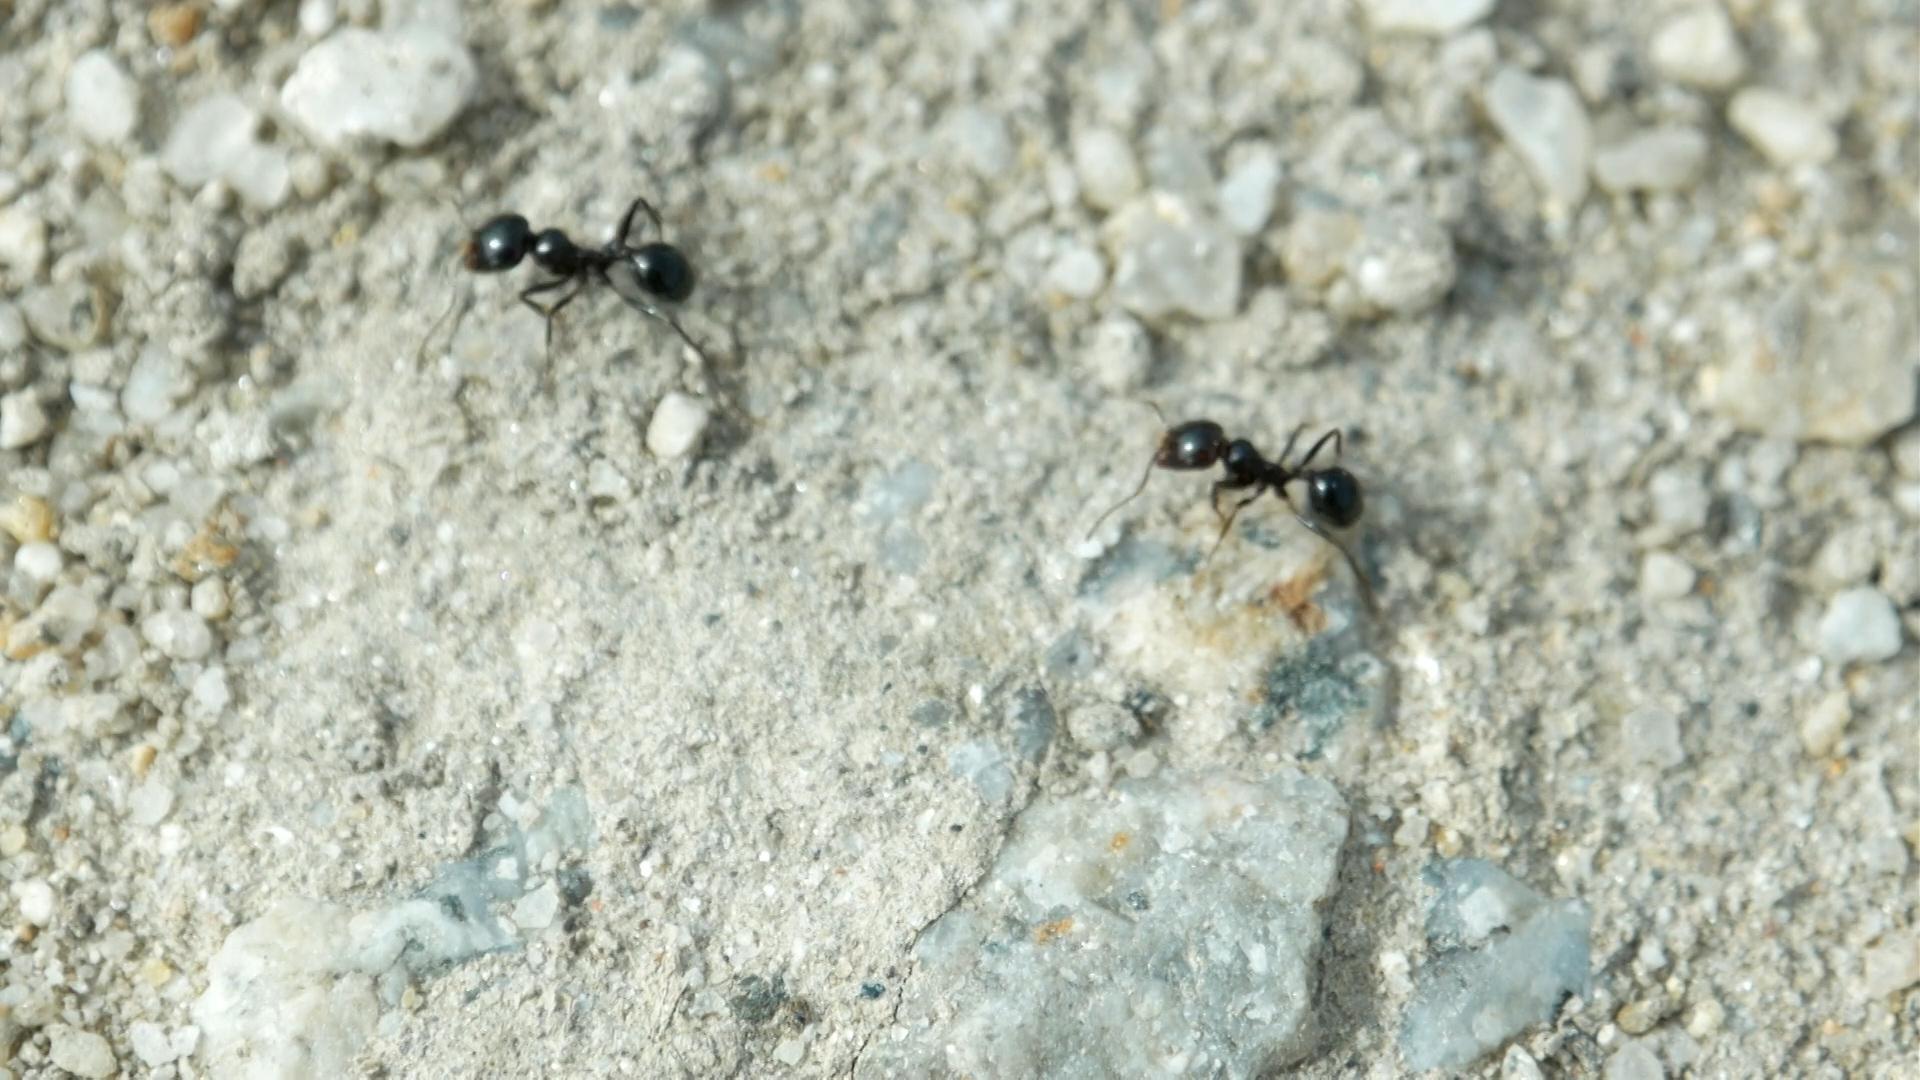 Crazy Ants: How to Get Rid of Crazy Ants?